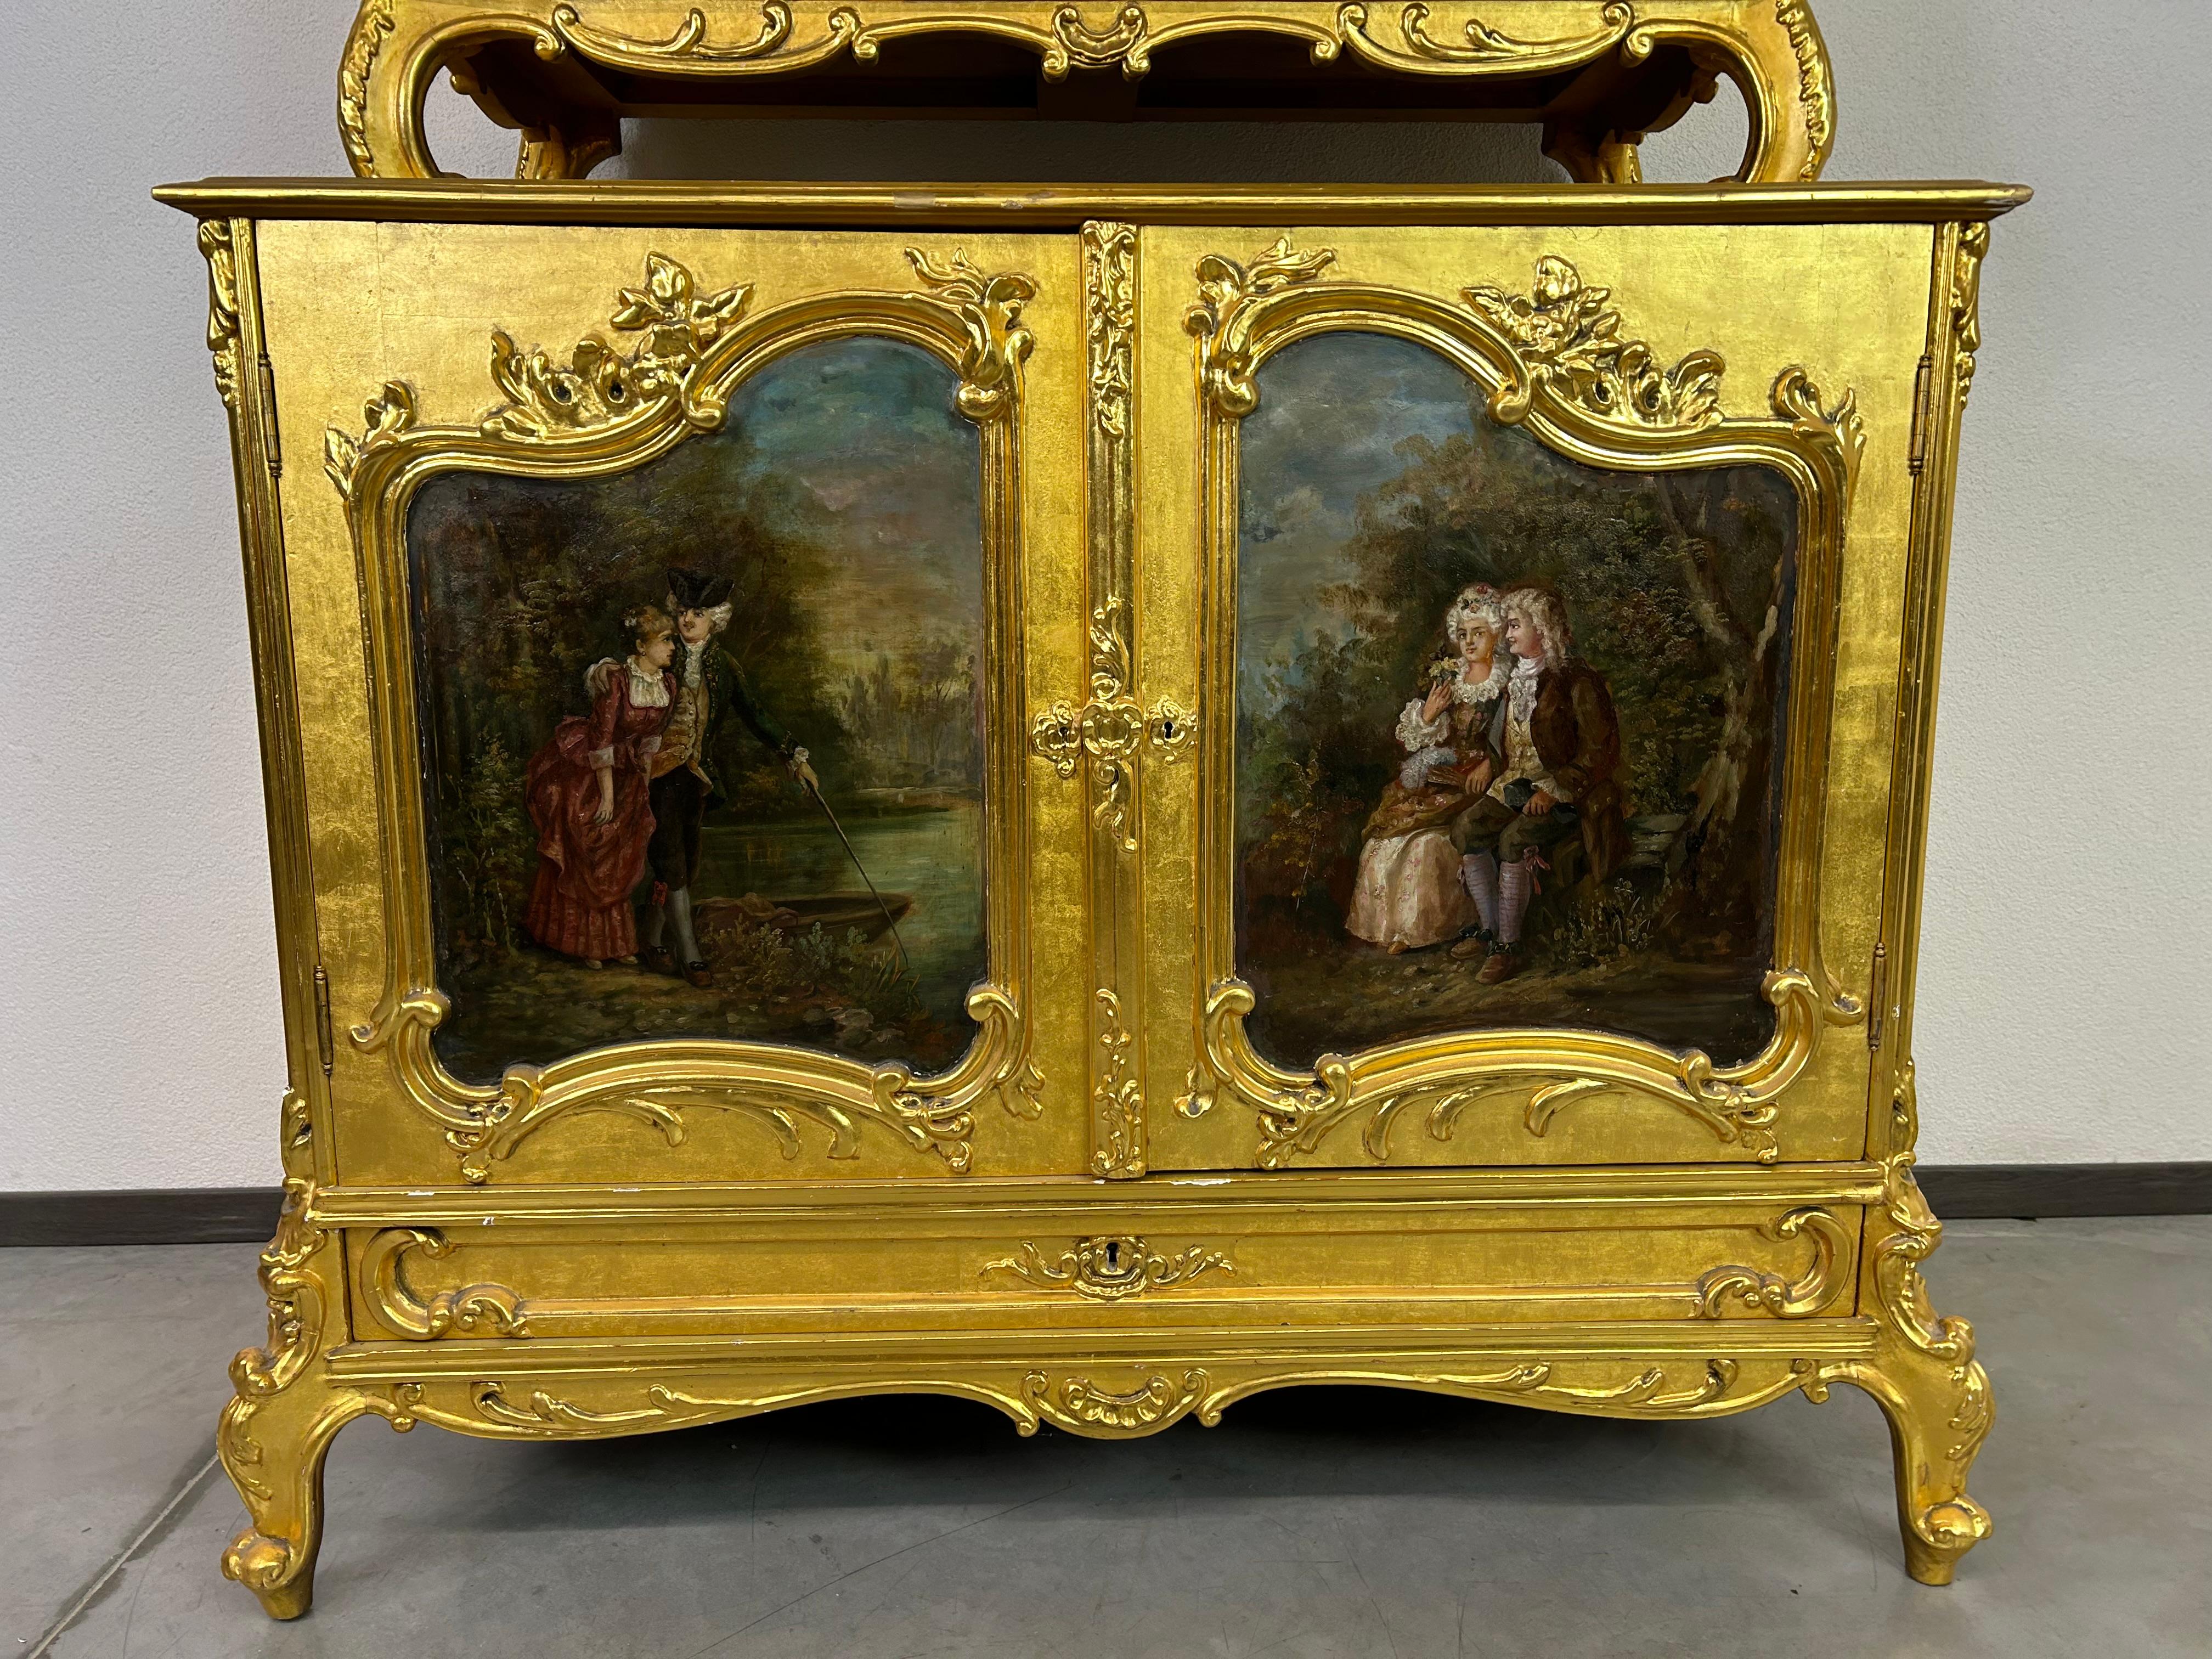 Gilded Rococo sideboard 18th century. Gilded polychrome finish, hand painted doors, beautiful original preservation with traces of use.